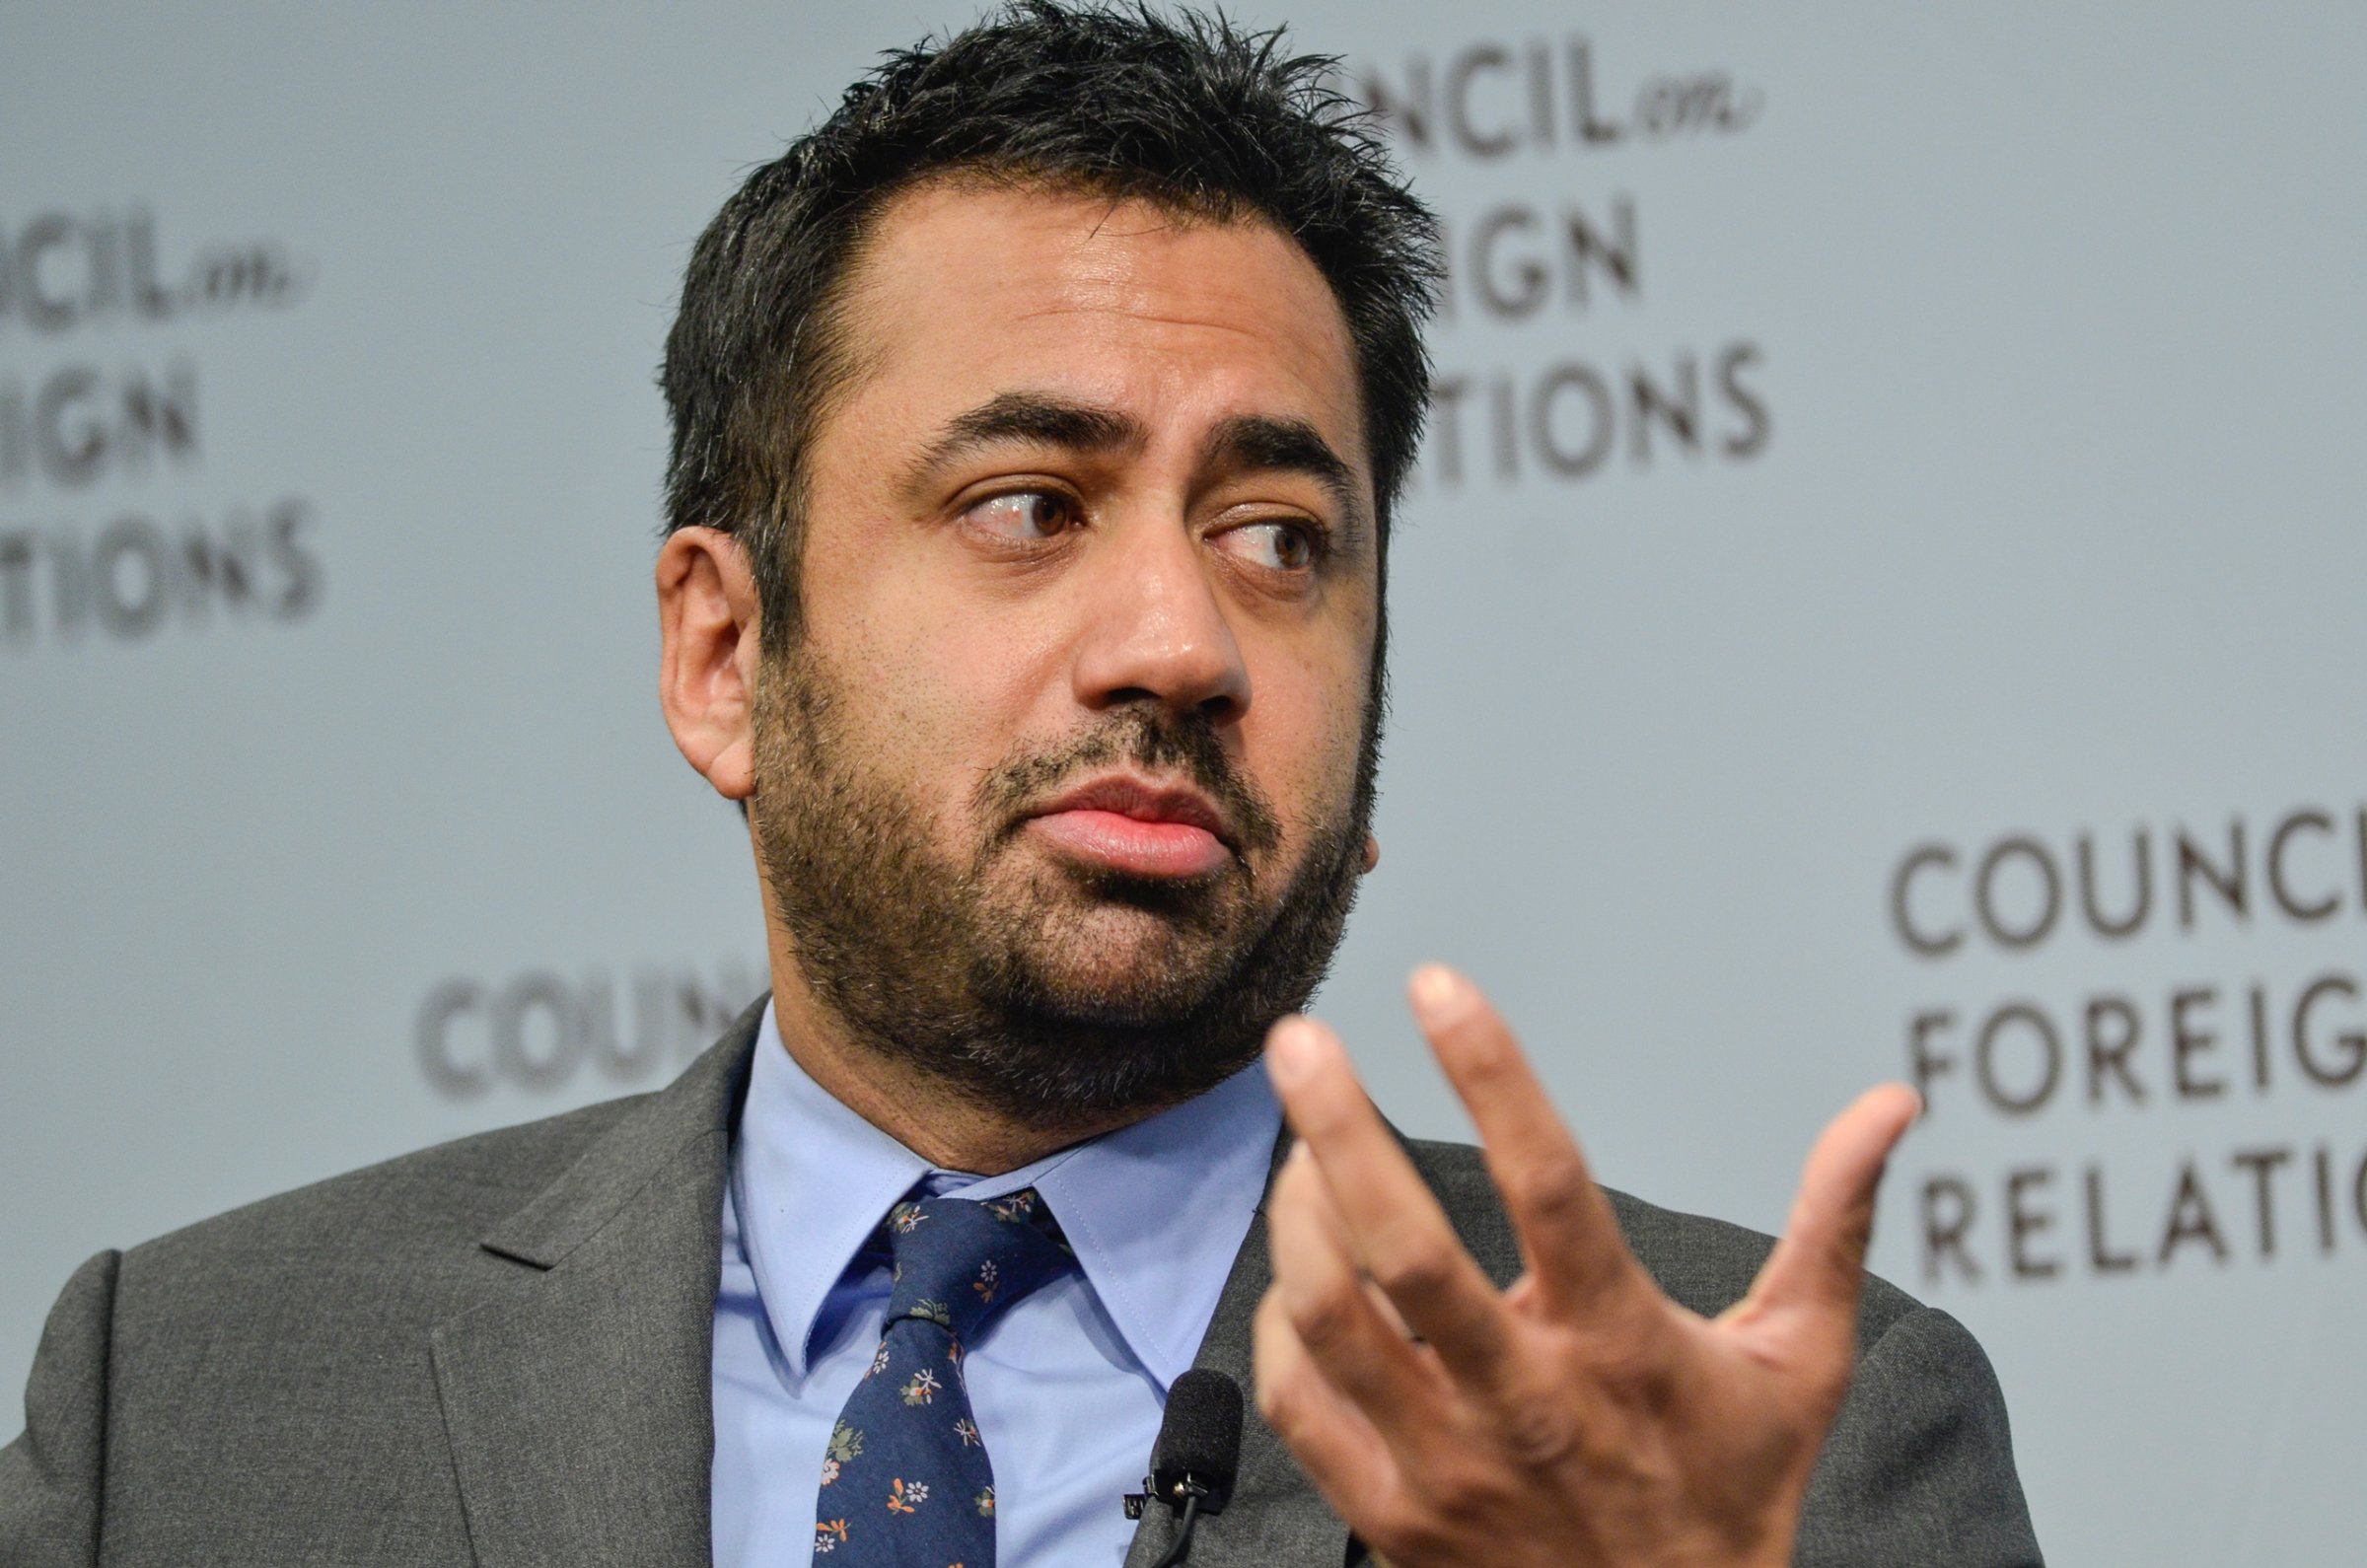 WASHINGTON, DC - APRIL 15: Actor and former White House Office of Public Engagement Associate Director Kal Penn speaks during the " 2016 Conference On Diversity In International Affairs" at the Council on Foreign Relations on April 15, 2016 in Washington, DC. (Photo by Kris Connor/Getty Images)